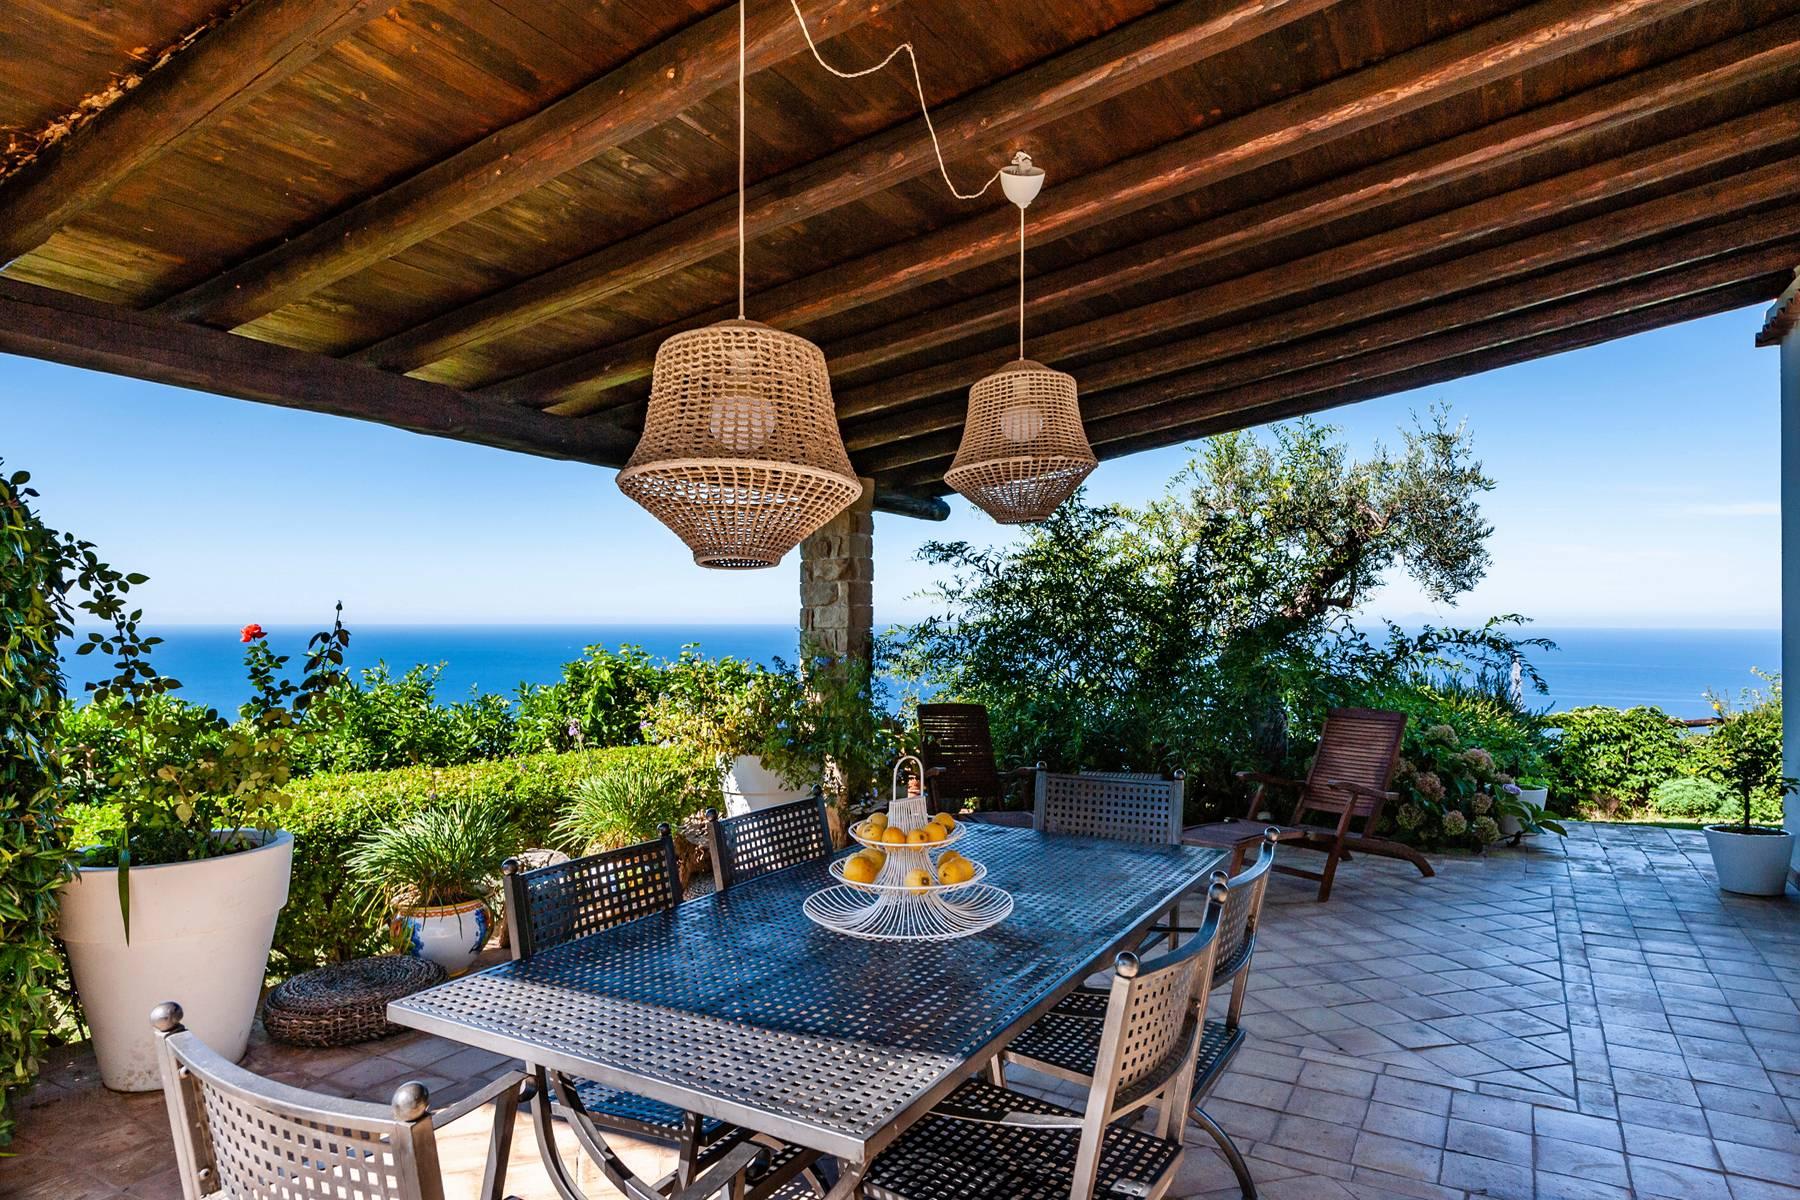 Charming villa with private pool overlooking the Eeolian Islands - 2